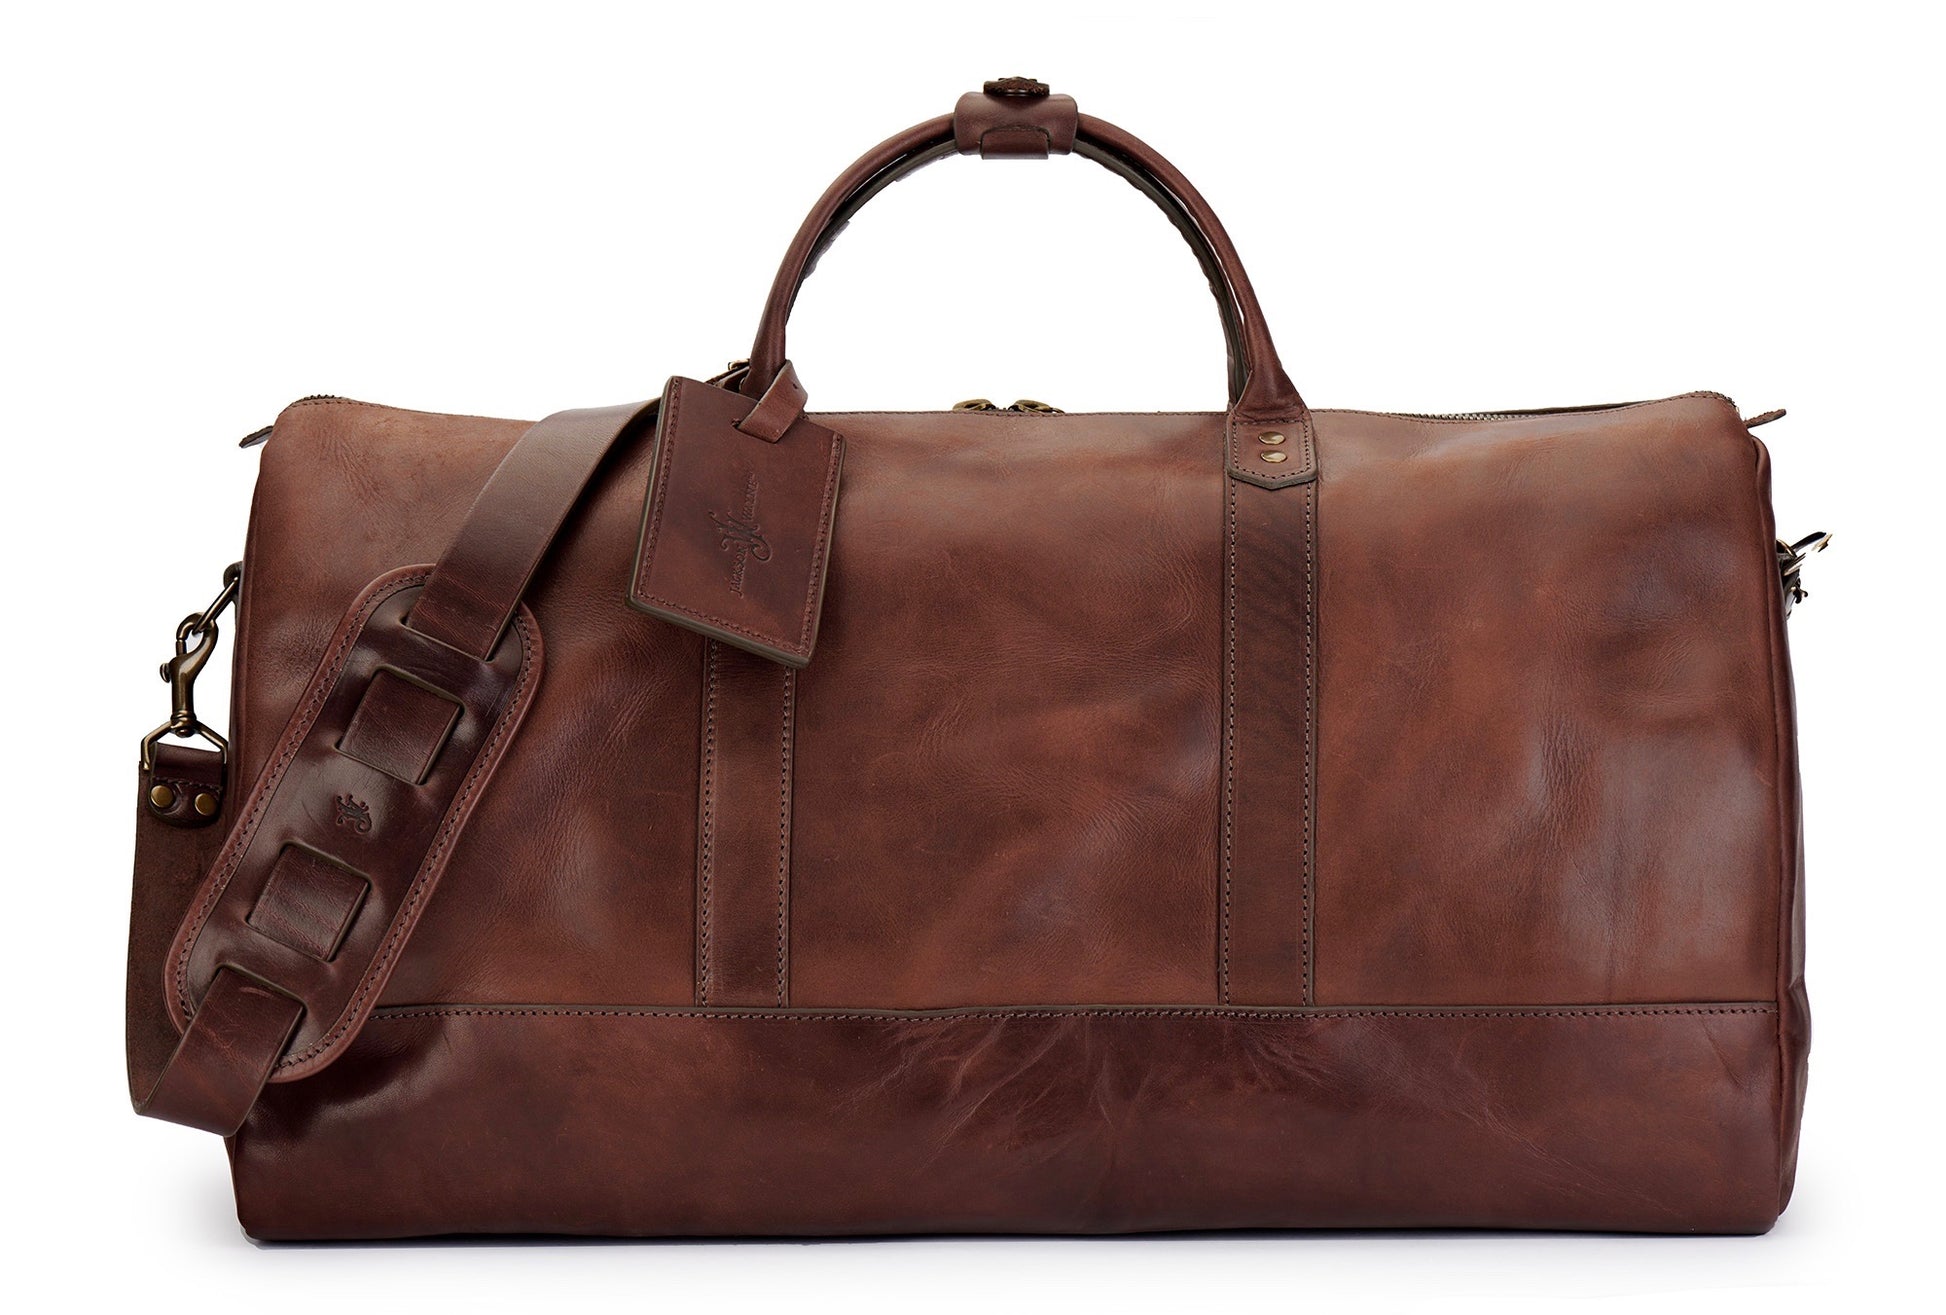 saddle tan full grain leather weekender bag with luggage tag in vintage brown and shoulder strap